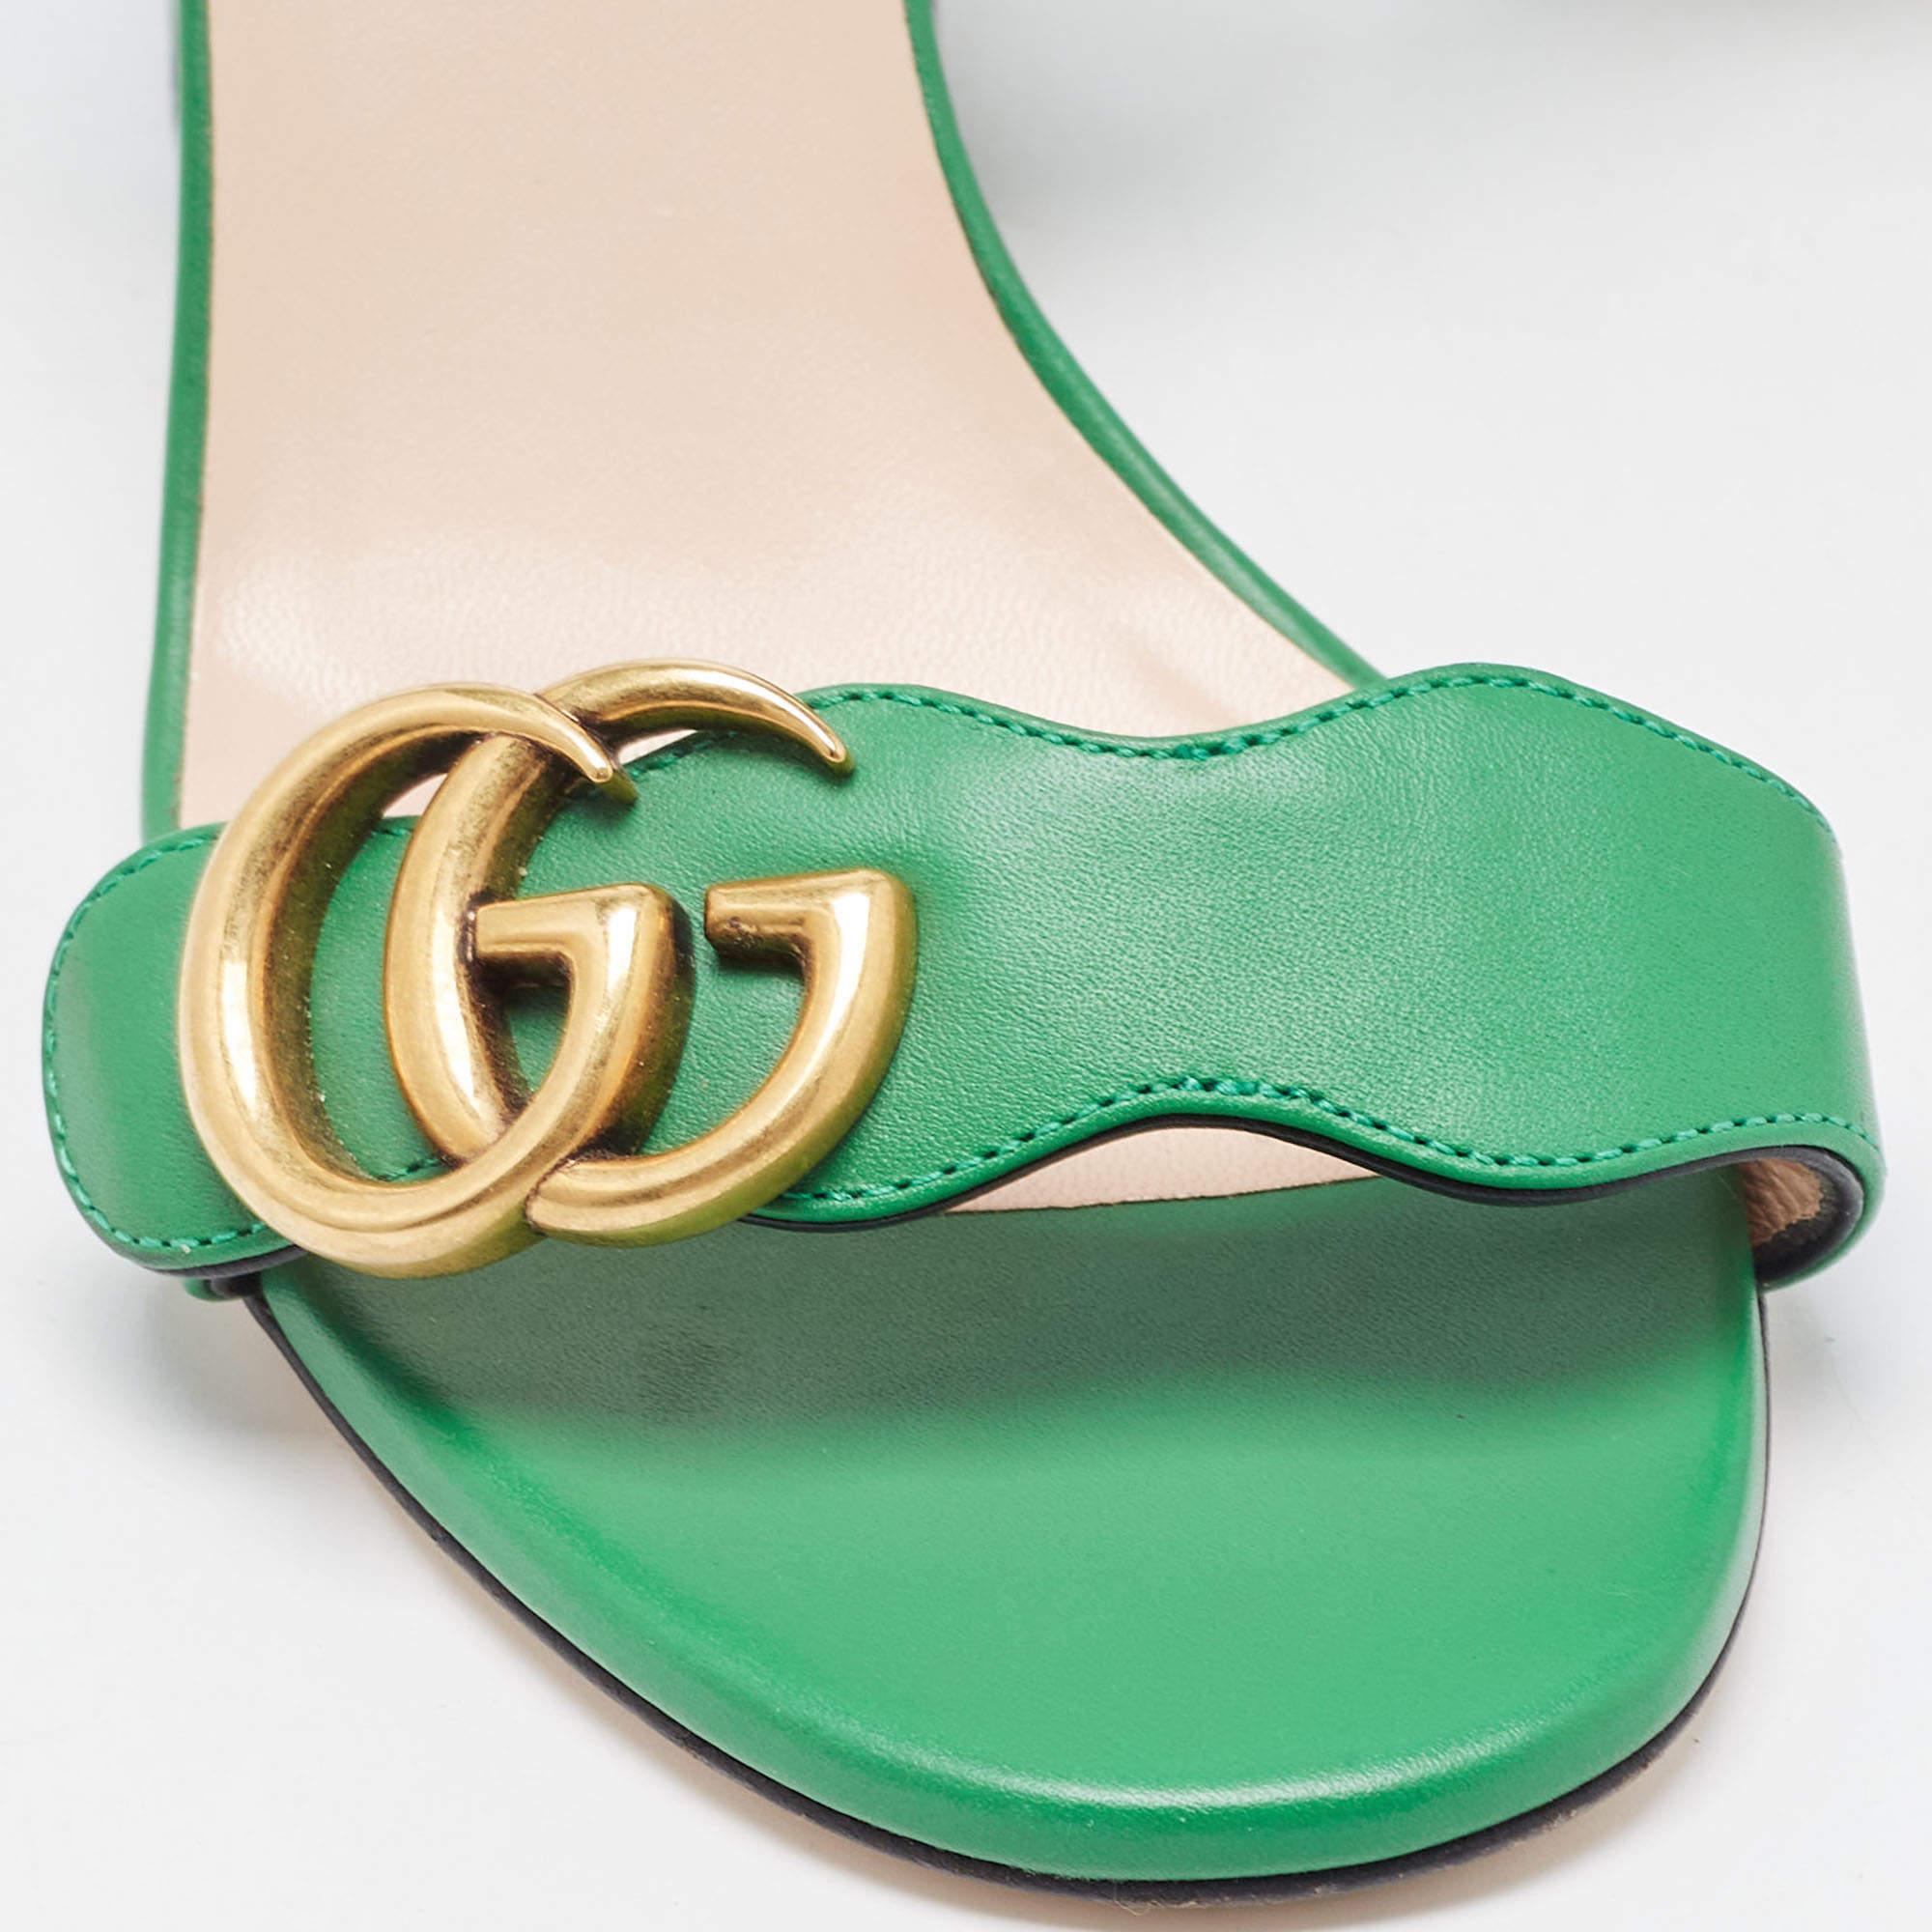 Gucci Green Leather GG Marmont Block Heel Ankle Strap Sandals Size 36 5